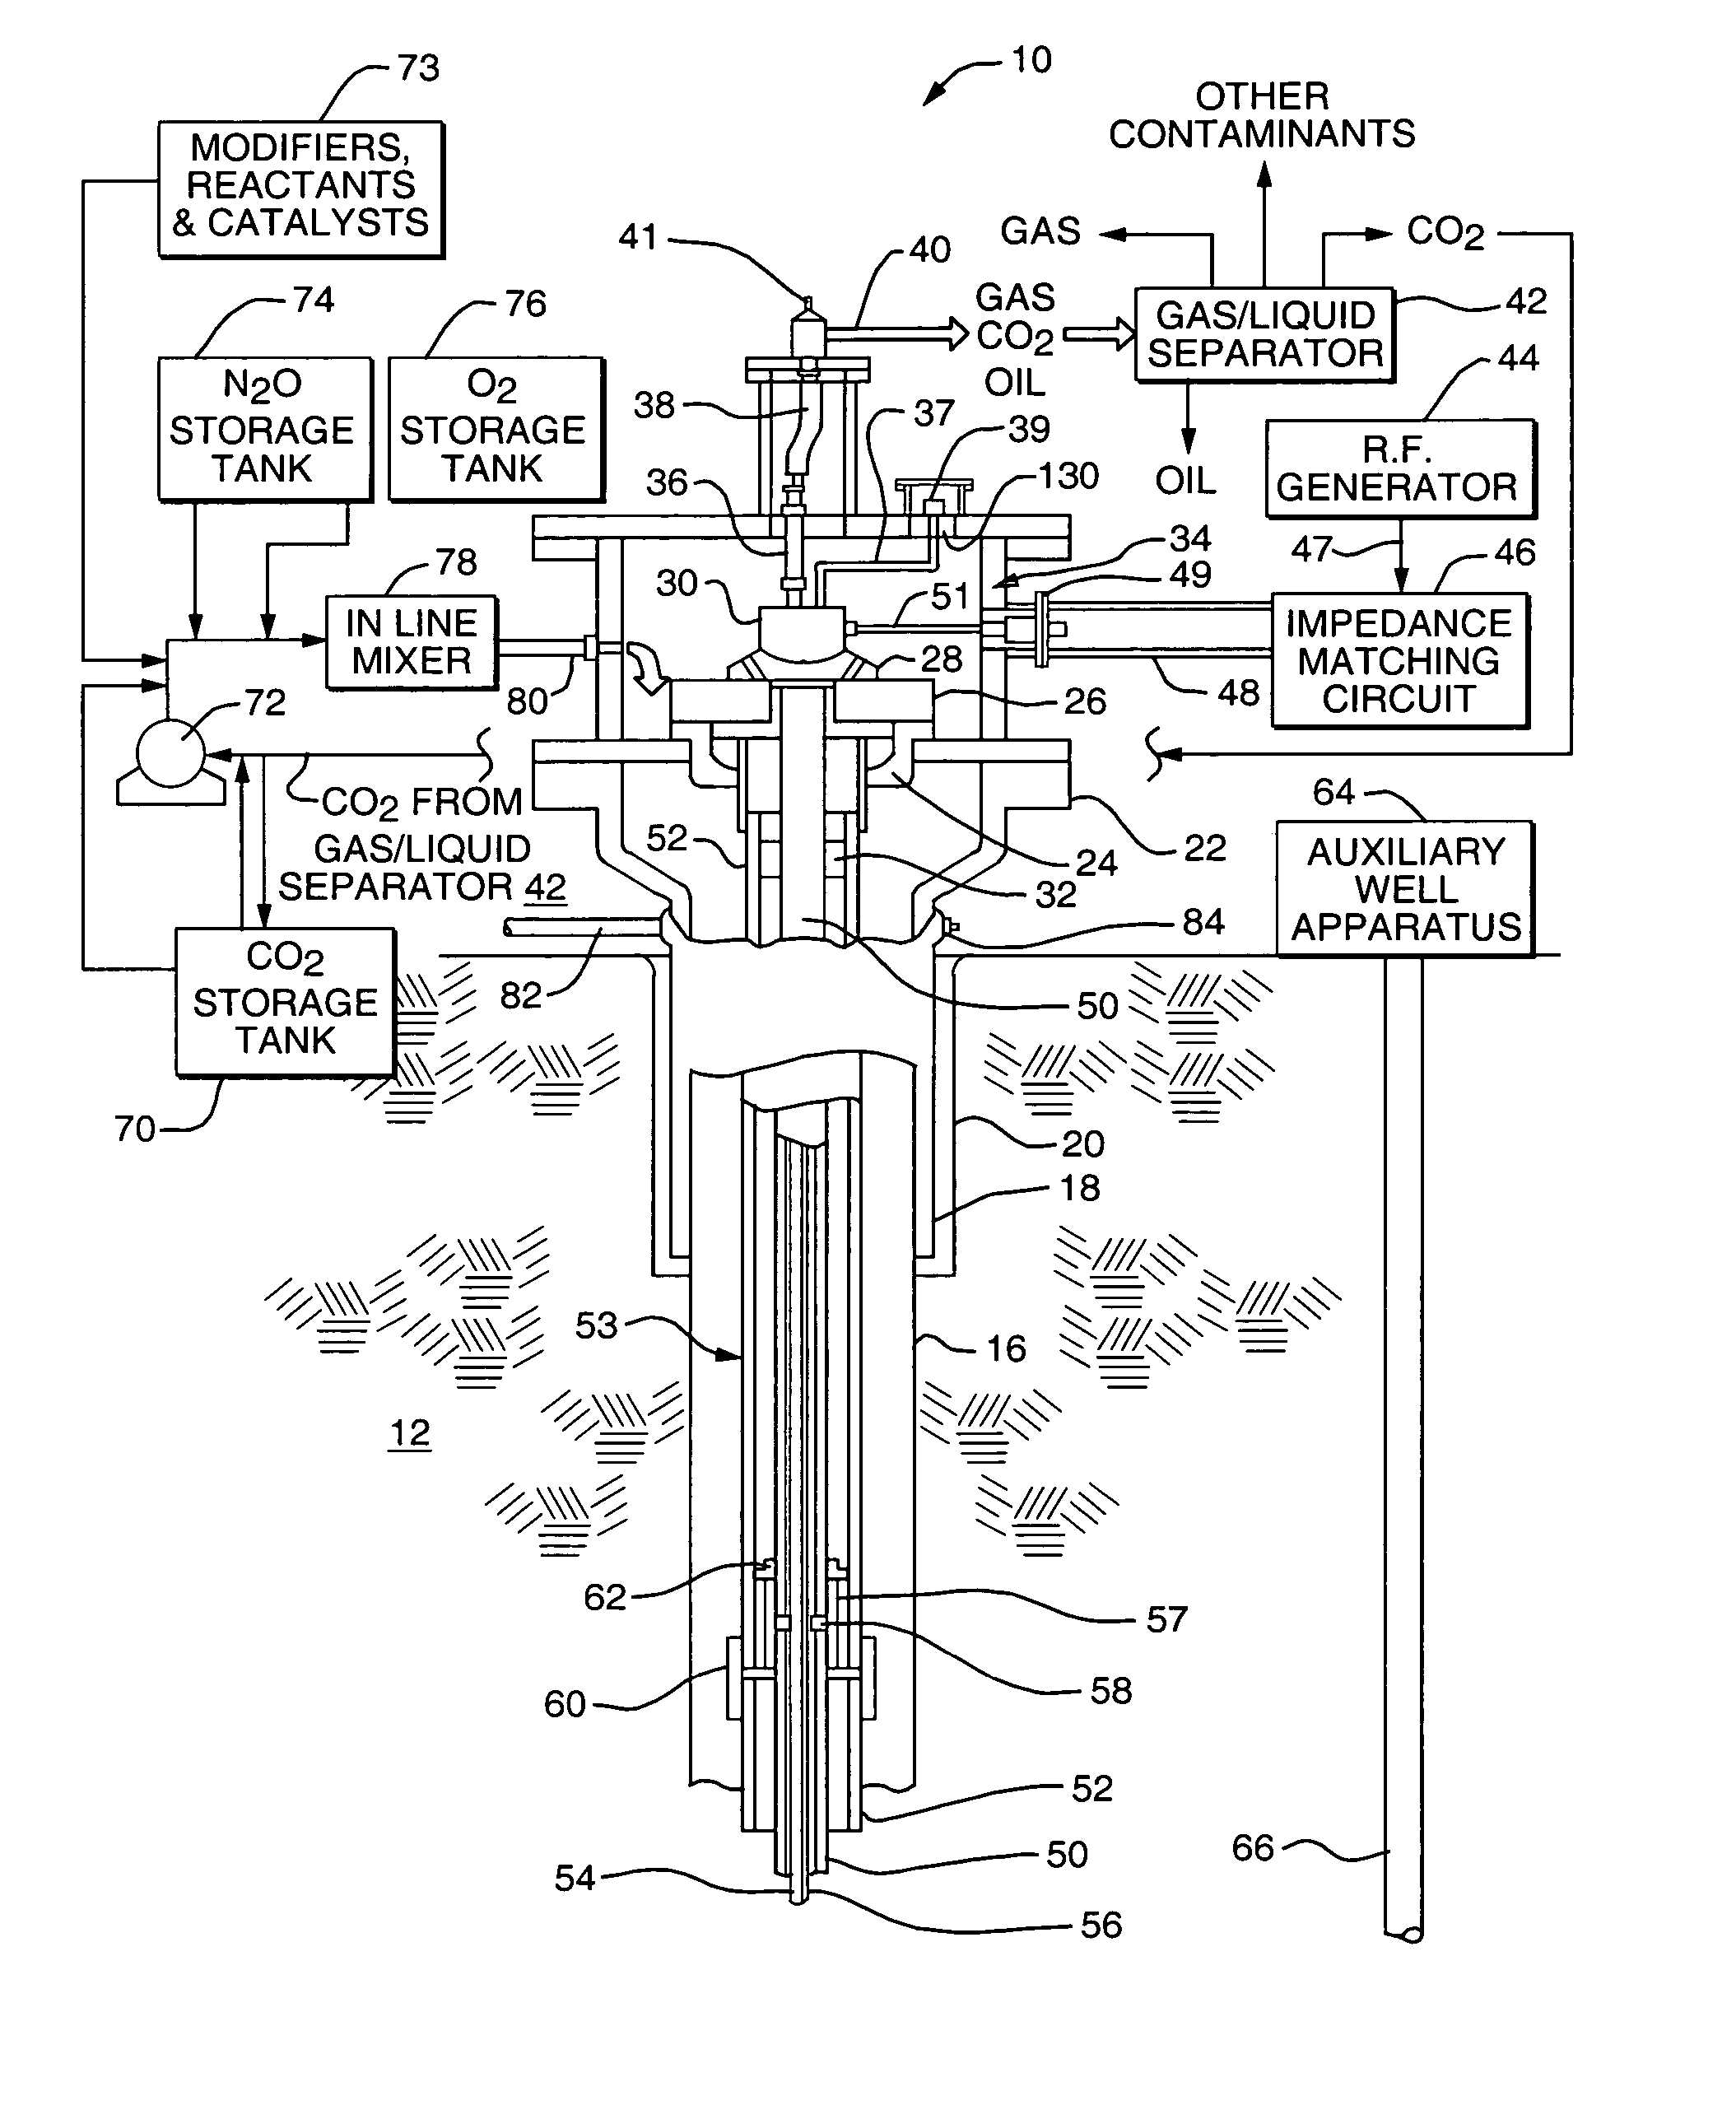 Apparatus for extraction of hydrocarbon fuels or contaminants using electrical energy and critical fluids